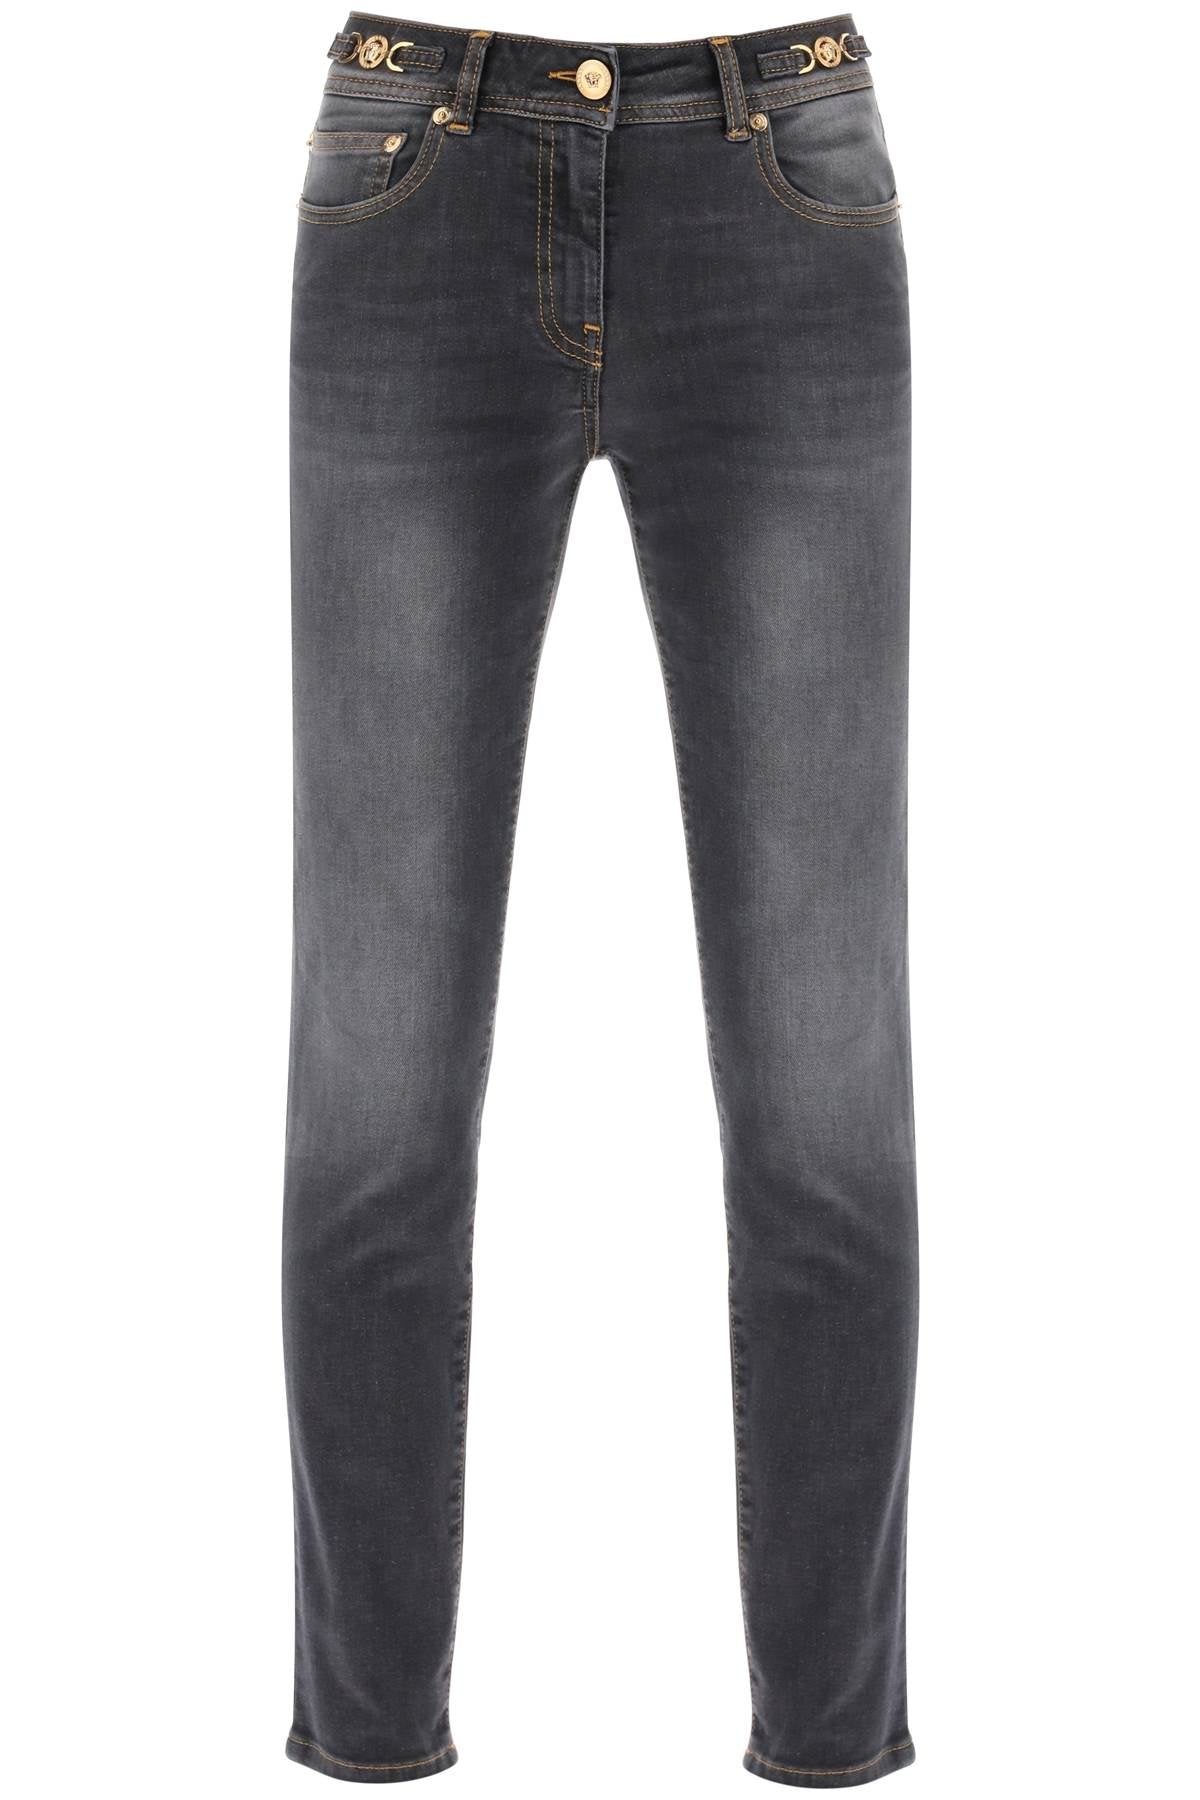 VERSACE Stone-washed Stretch Cotton Denim Skinny Jeans with Gold-Tone Metal Details